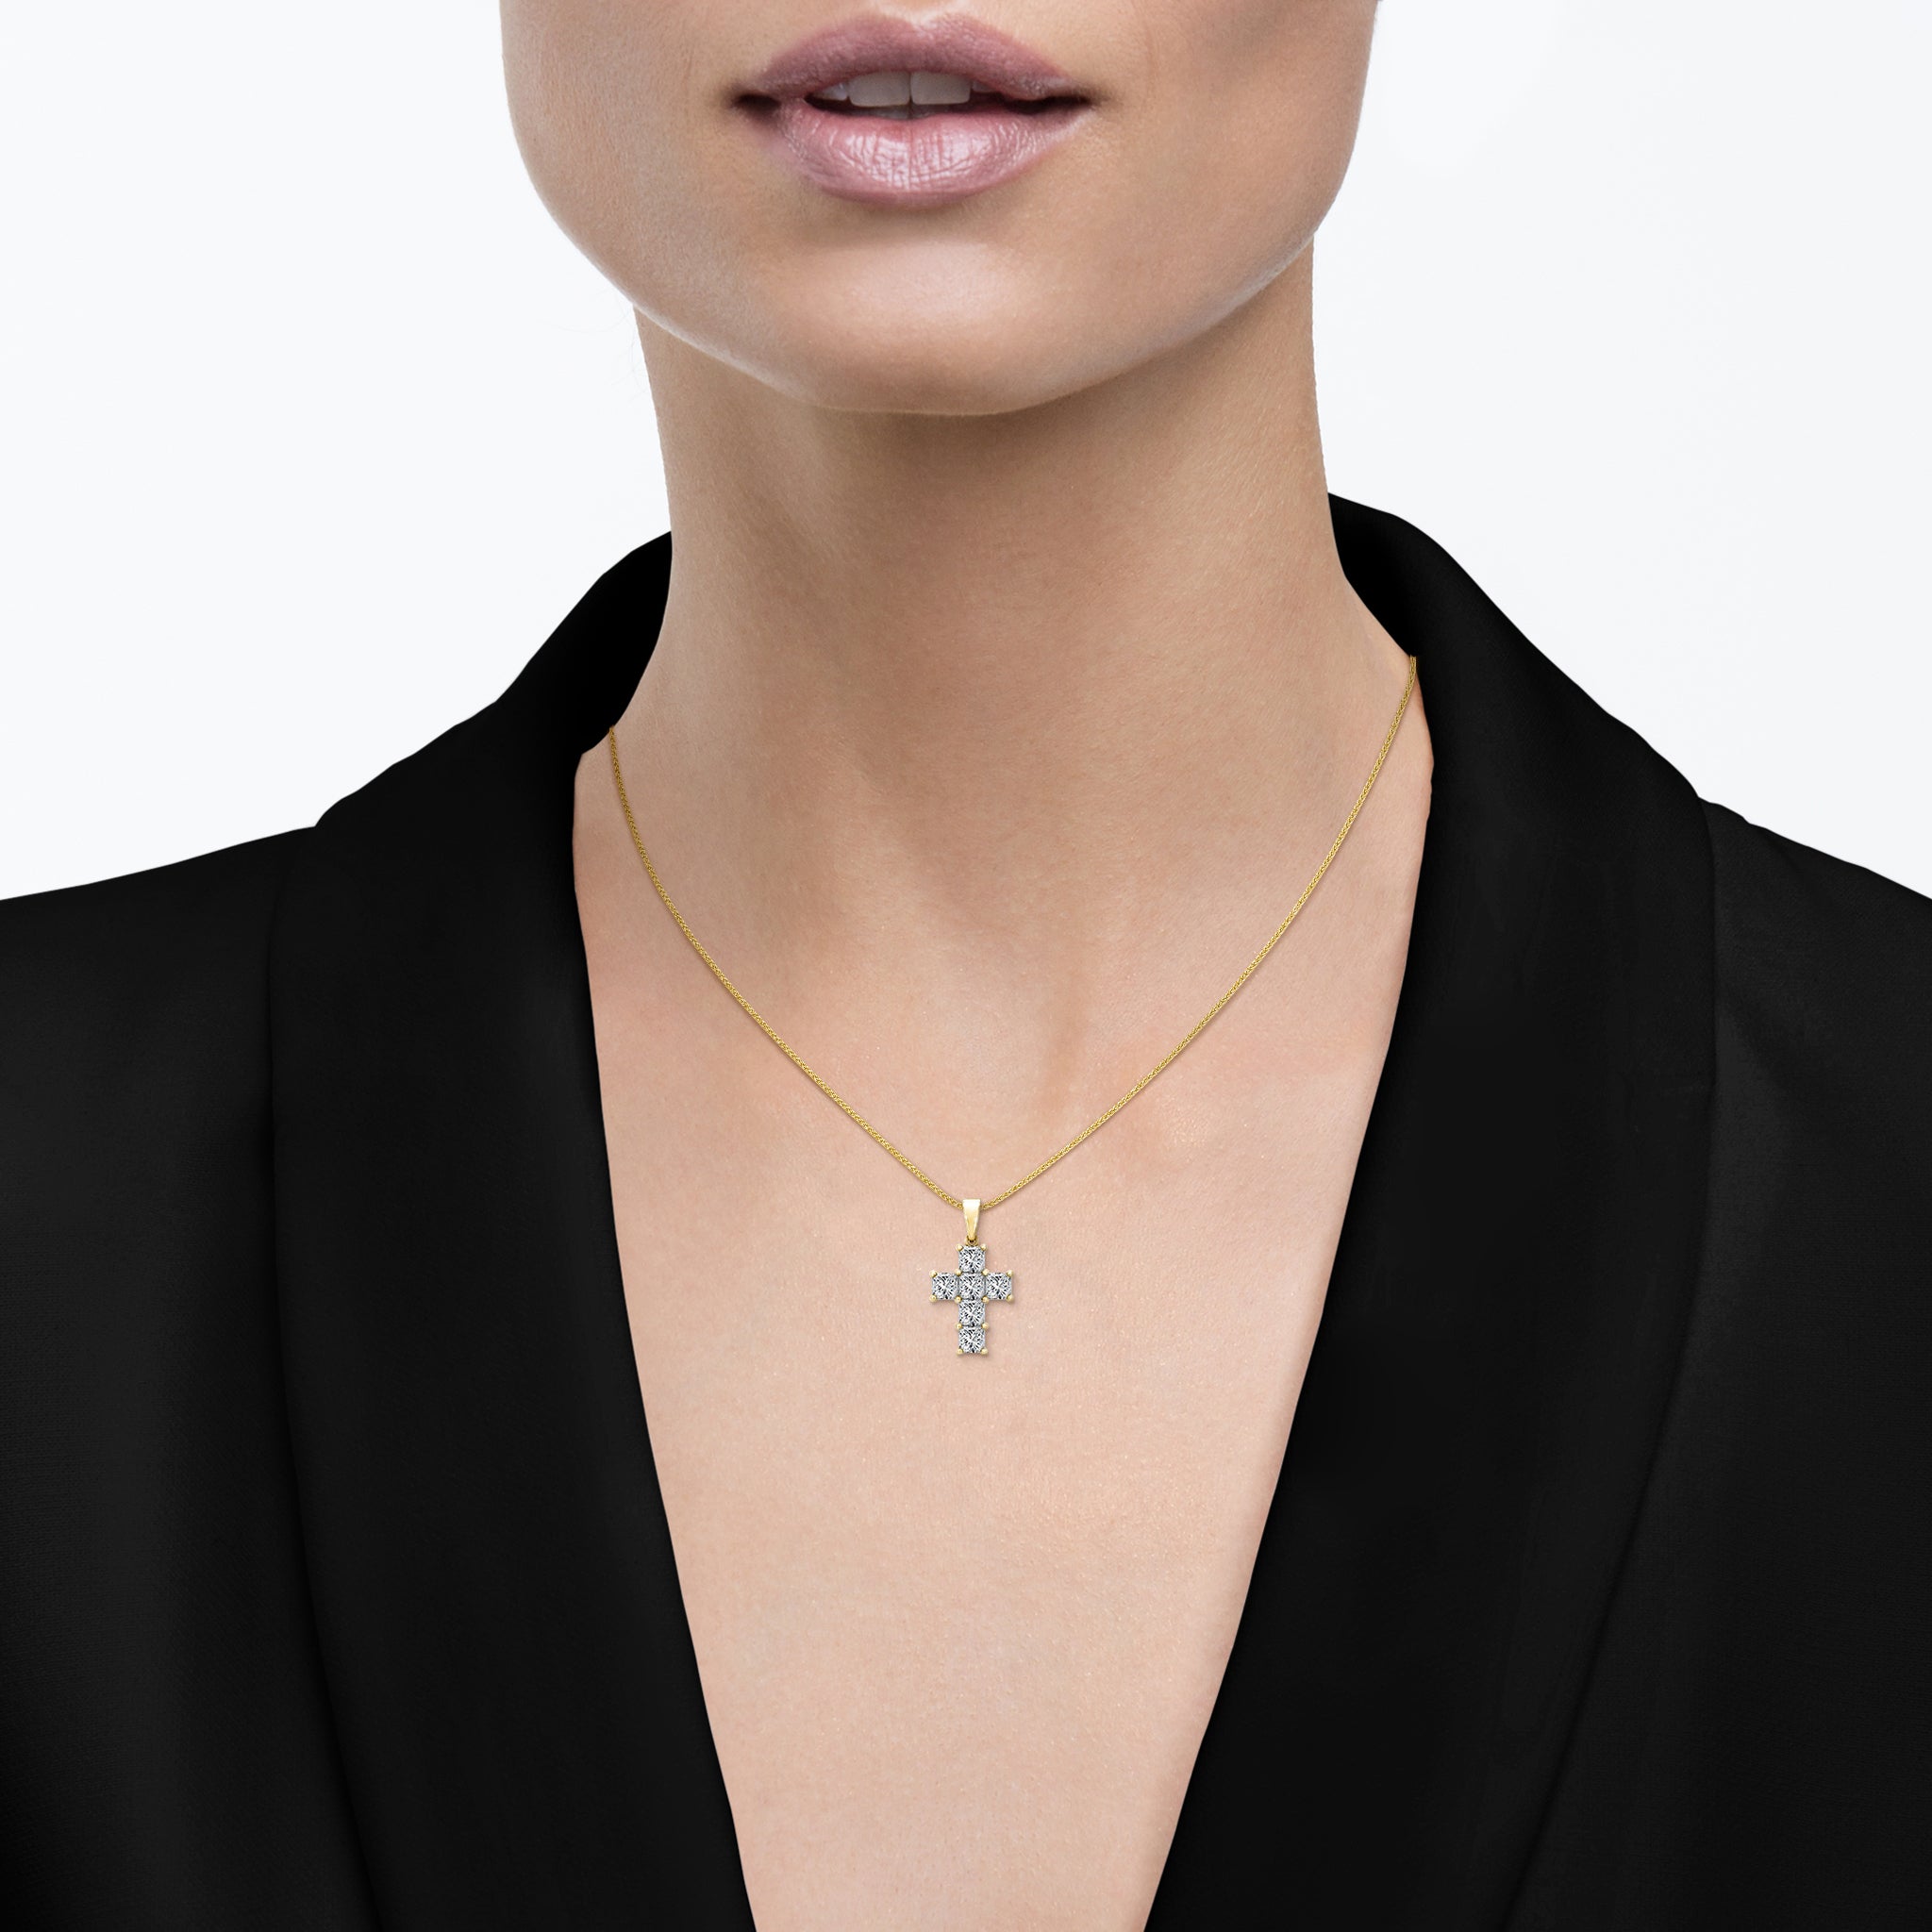 Shimansky - Women Wearing the My Girl Diamond Cross Pendant 1.00ct Crafted in 18K Yellow Gold